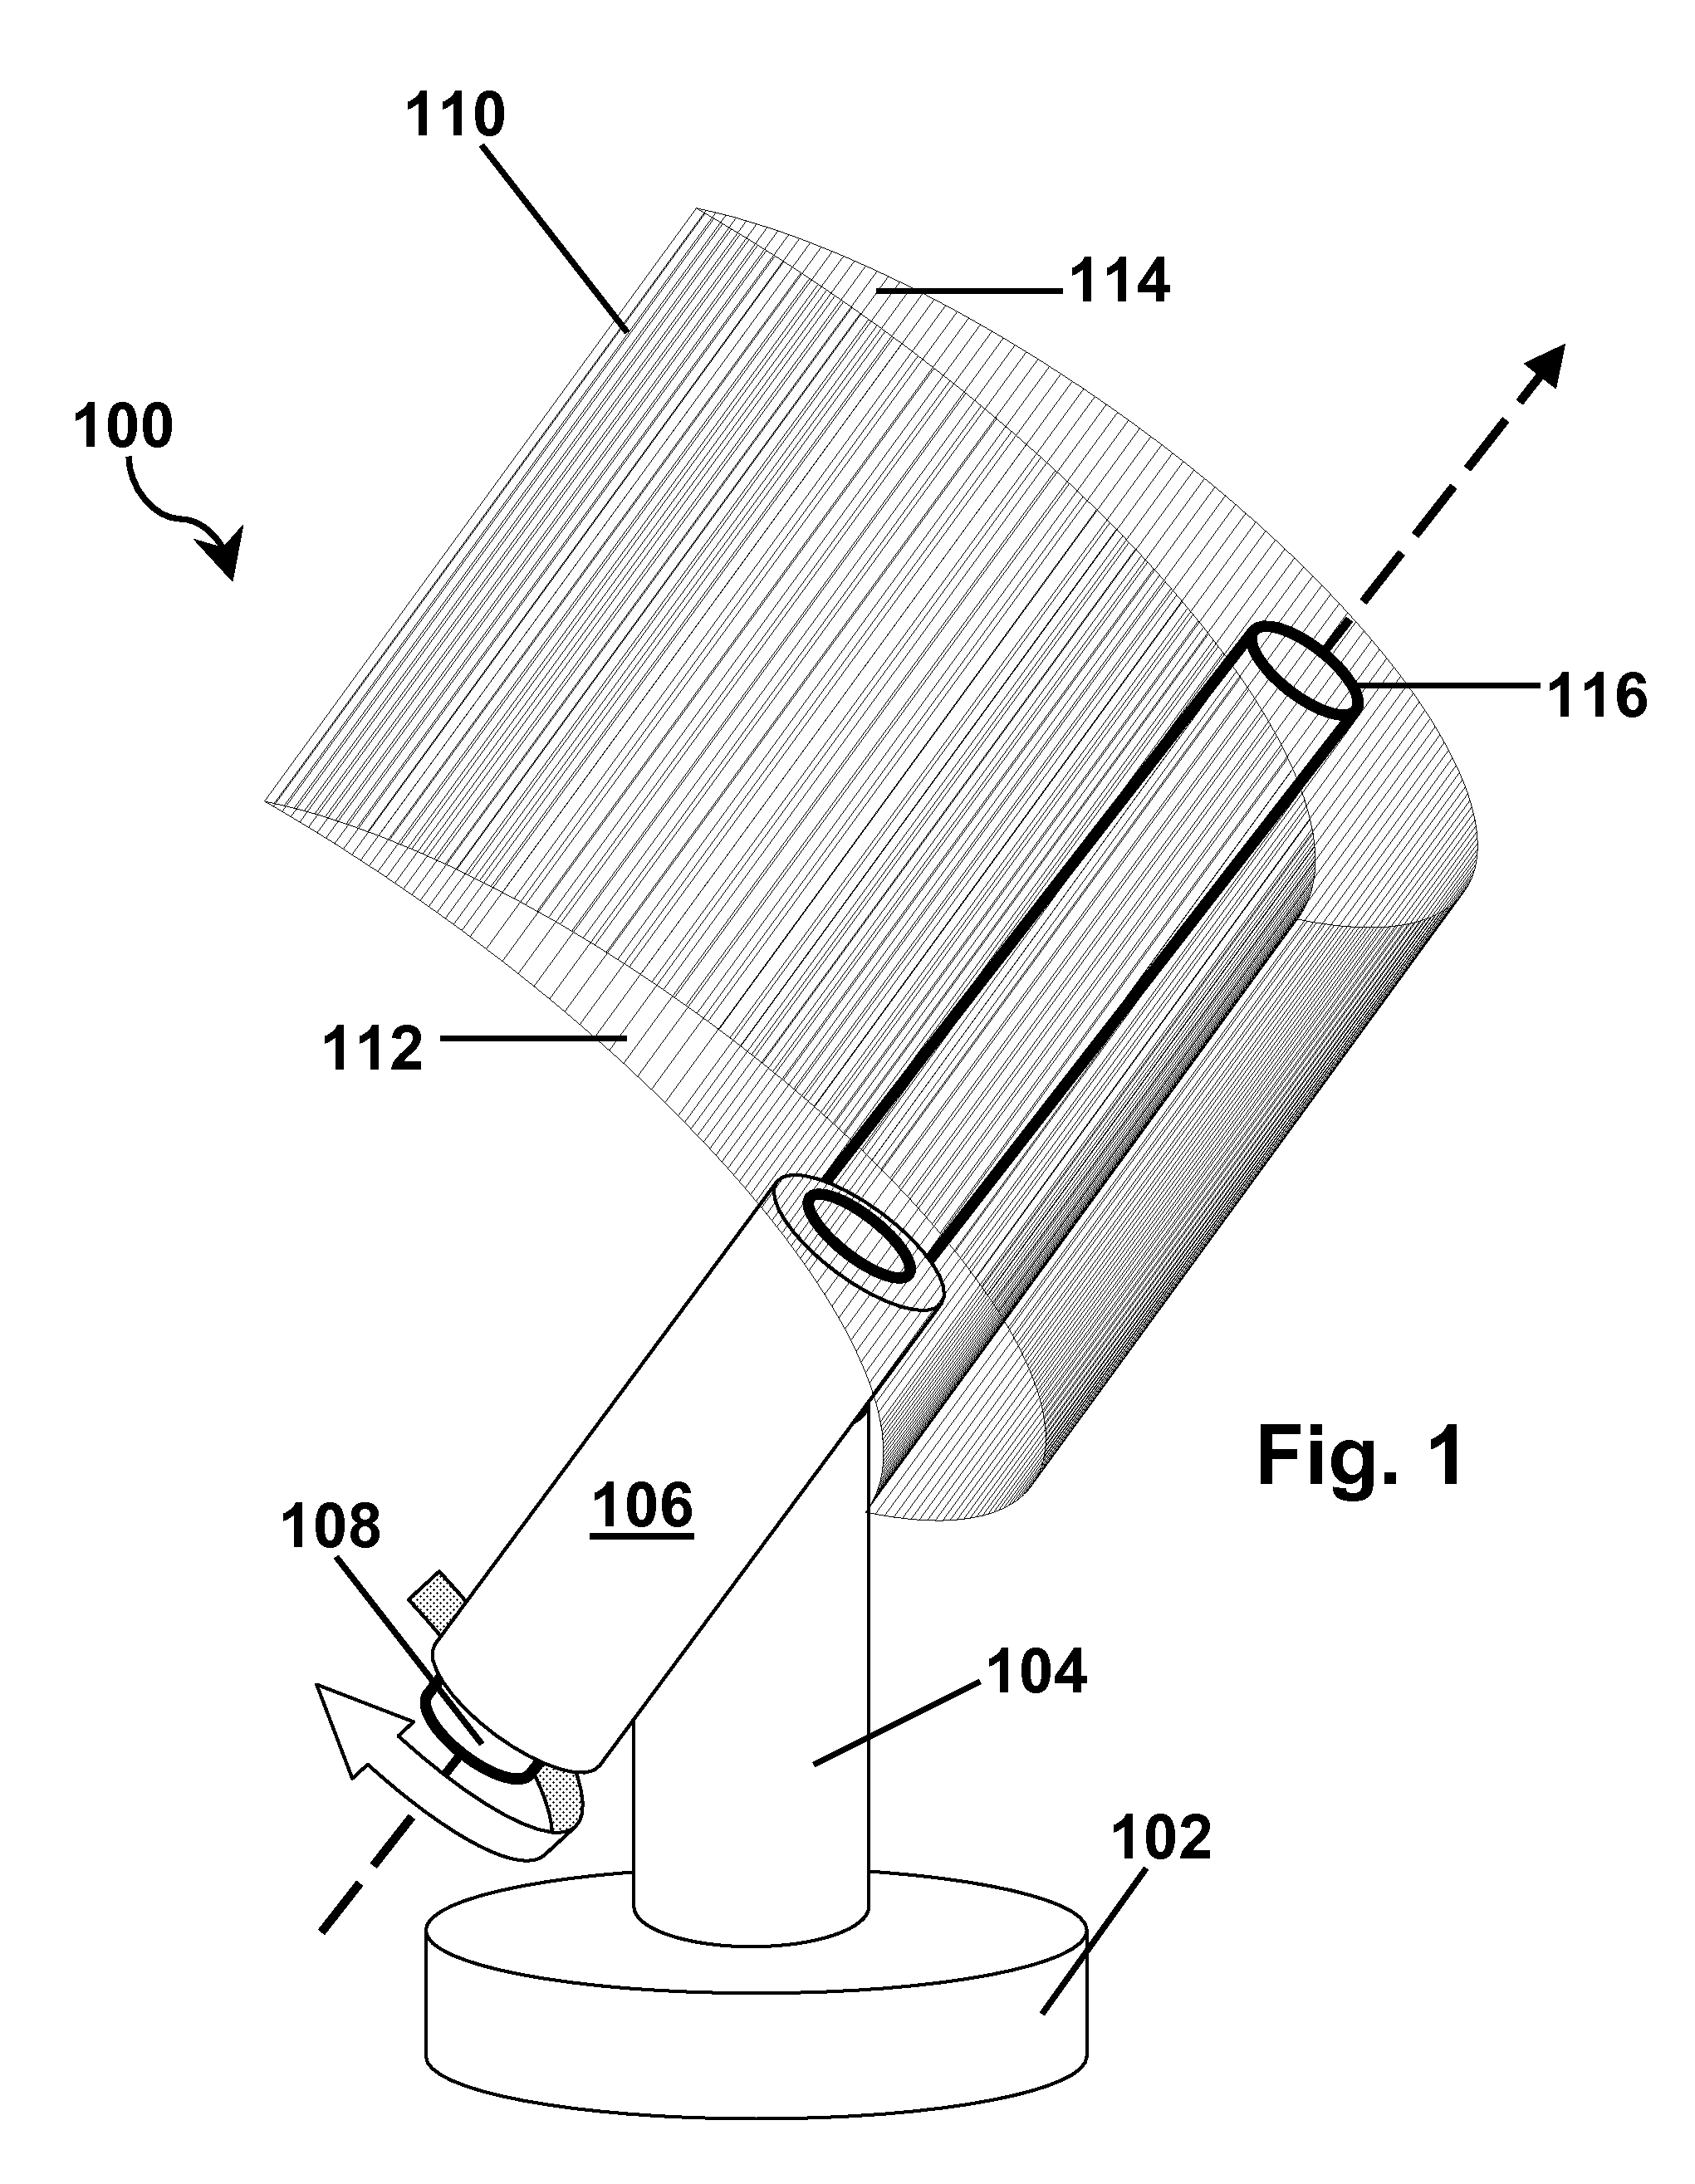 Bandgap-shifted semiconductor surface and method for making same, and apparatus for using same